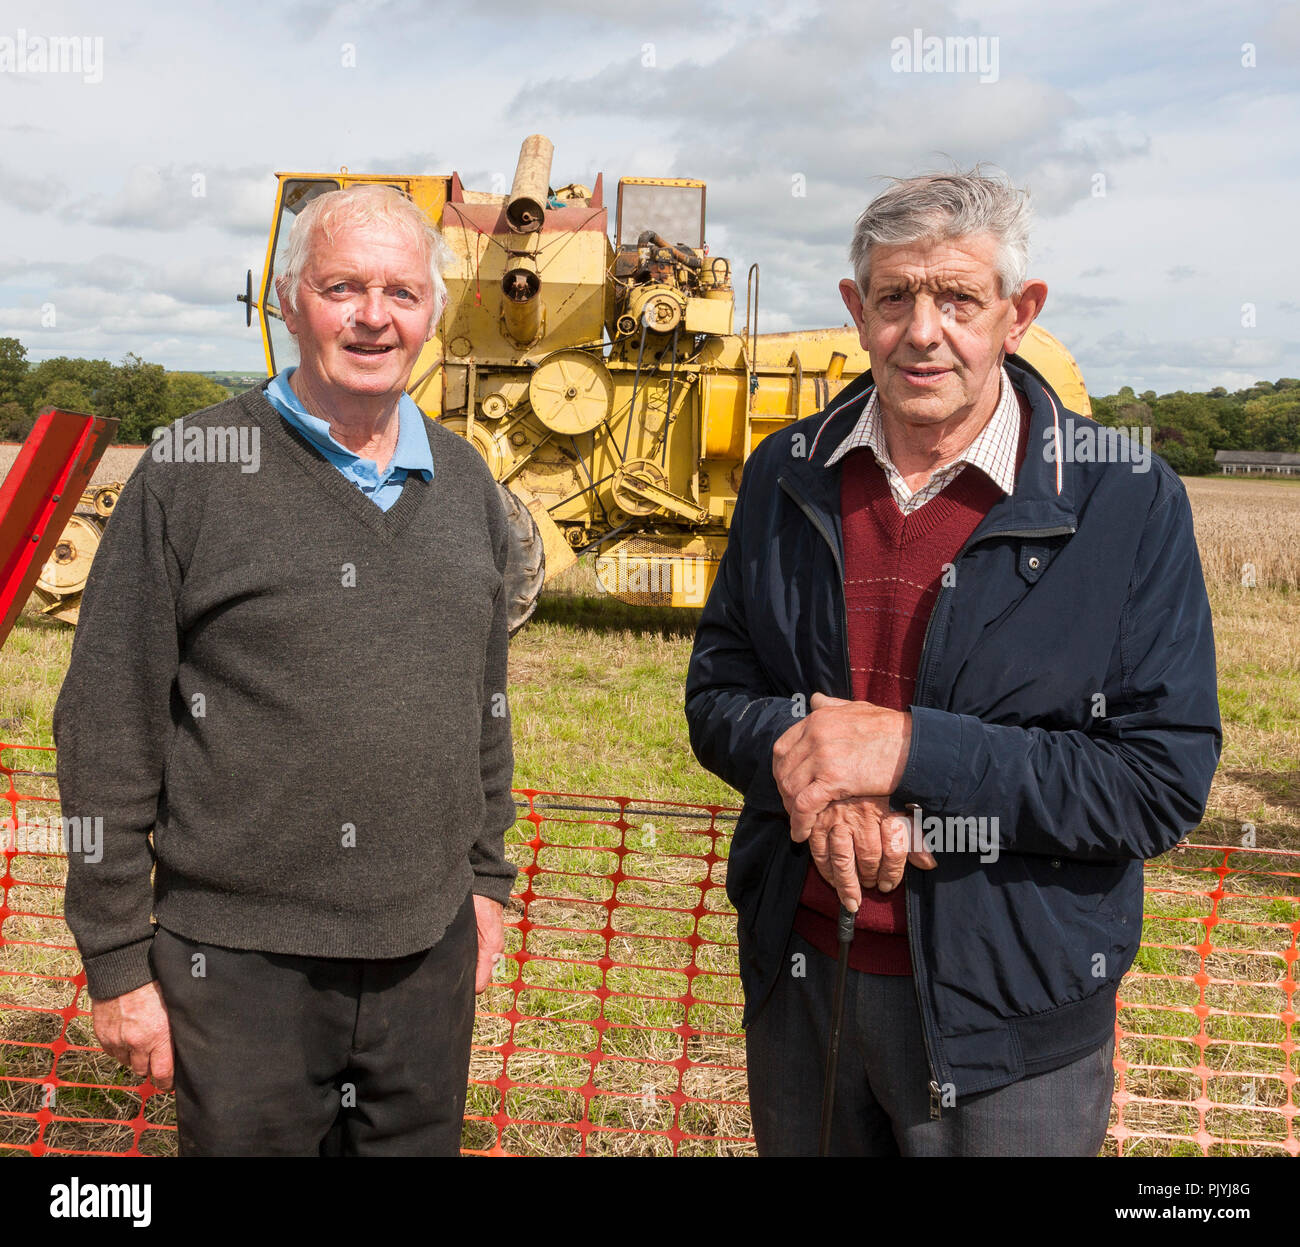 Timoleague, Cork, Ireland. 9th September 2018. John Sutton, Clonakilty and Kevin Finn of Timoleague at the West Cork Vintage Ploughing & Threshing event that was held at Barryshall Timoleague Co.Cork. Credit: David Creedon/Alamy Live News Stock Photo